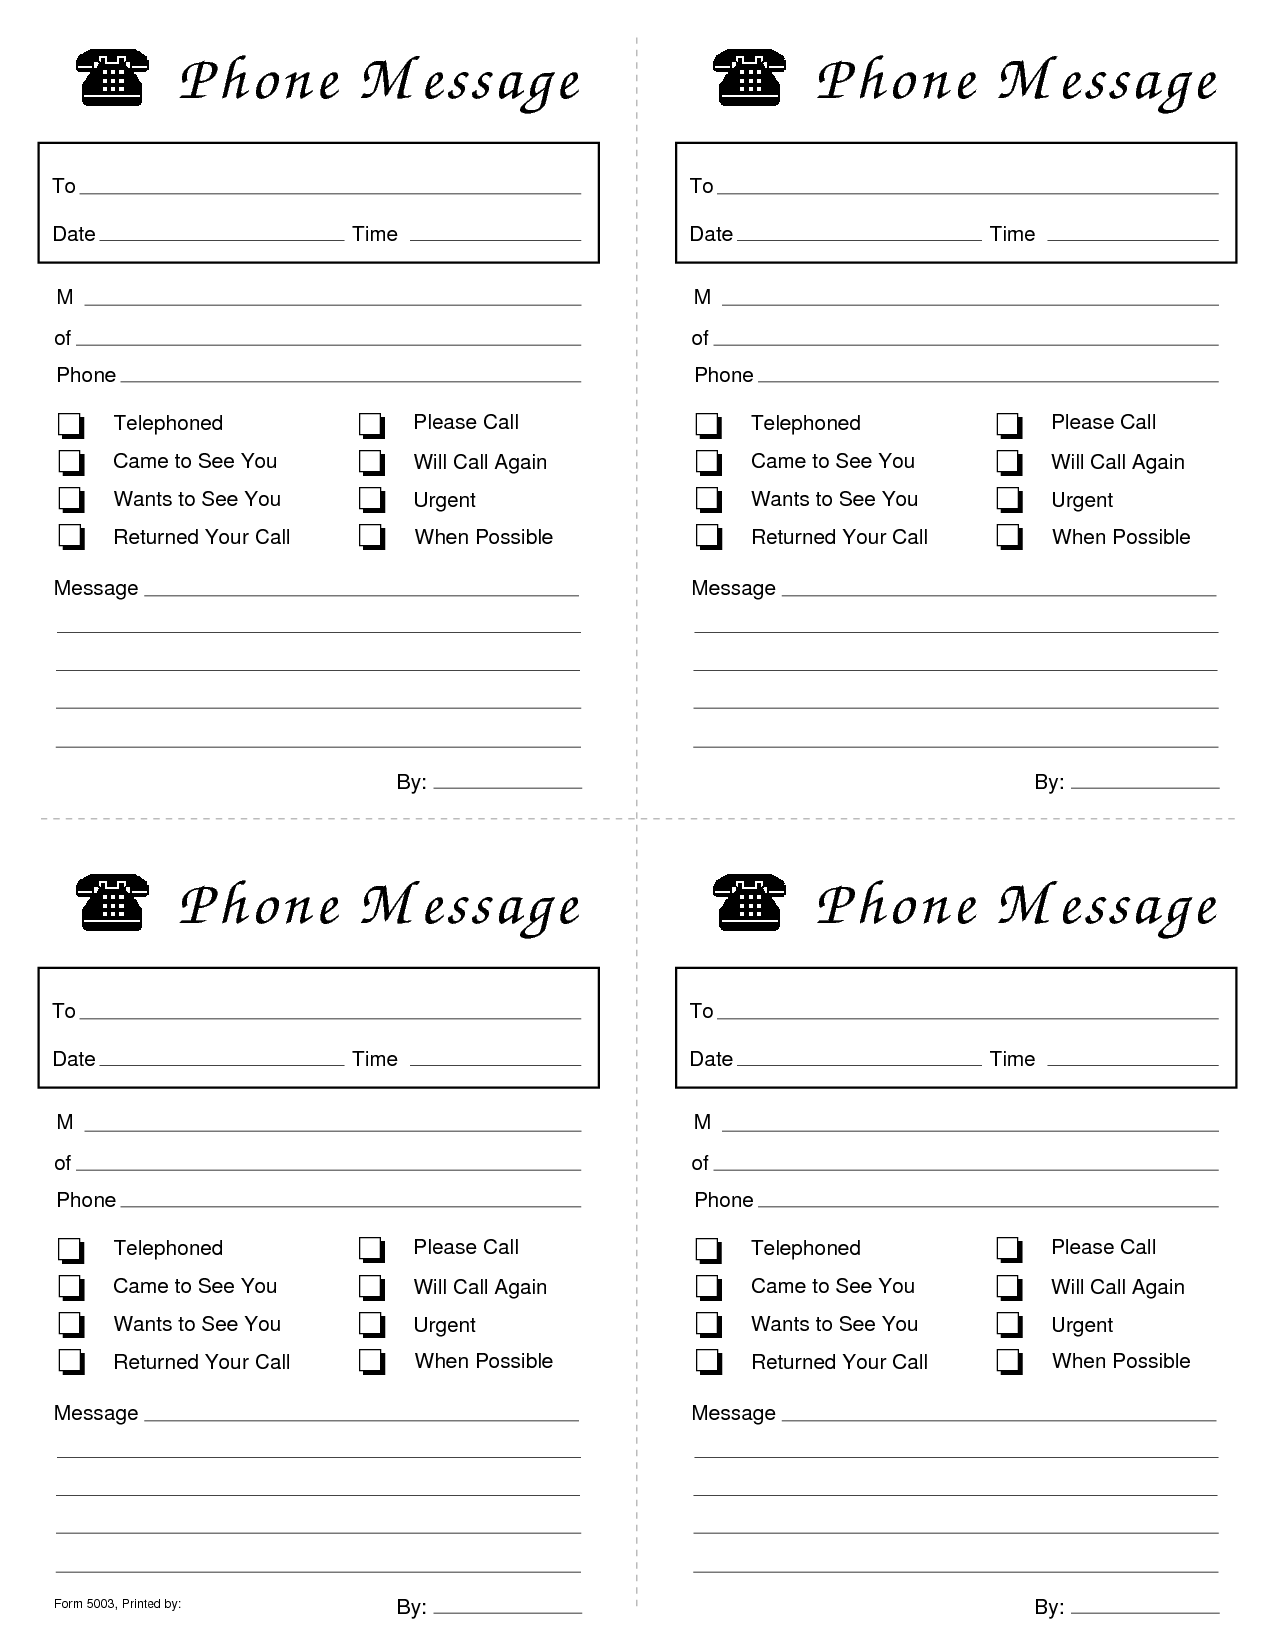 template-printable-images-gallery-category-page-36-printablee